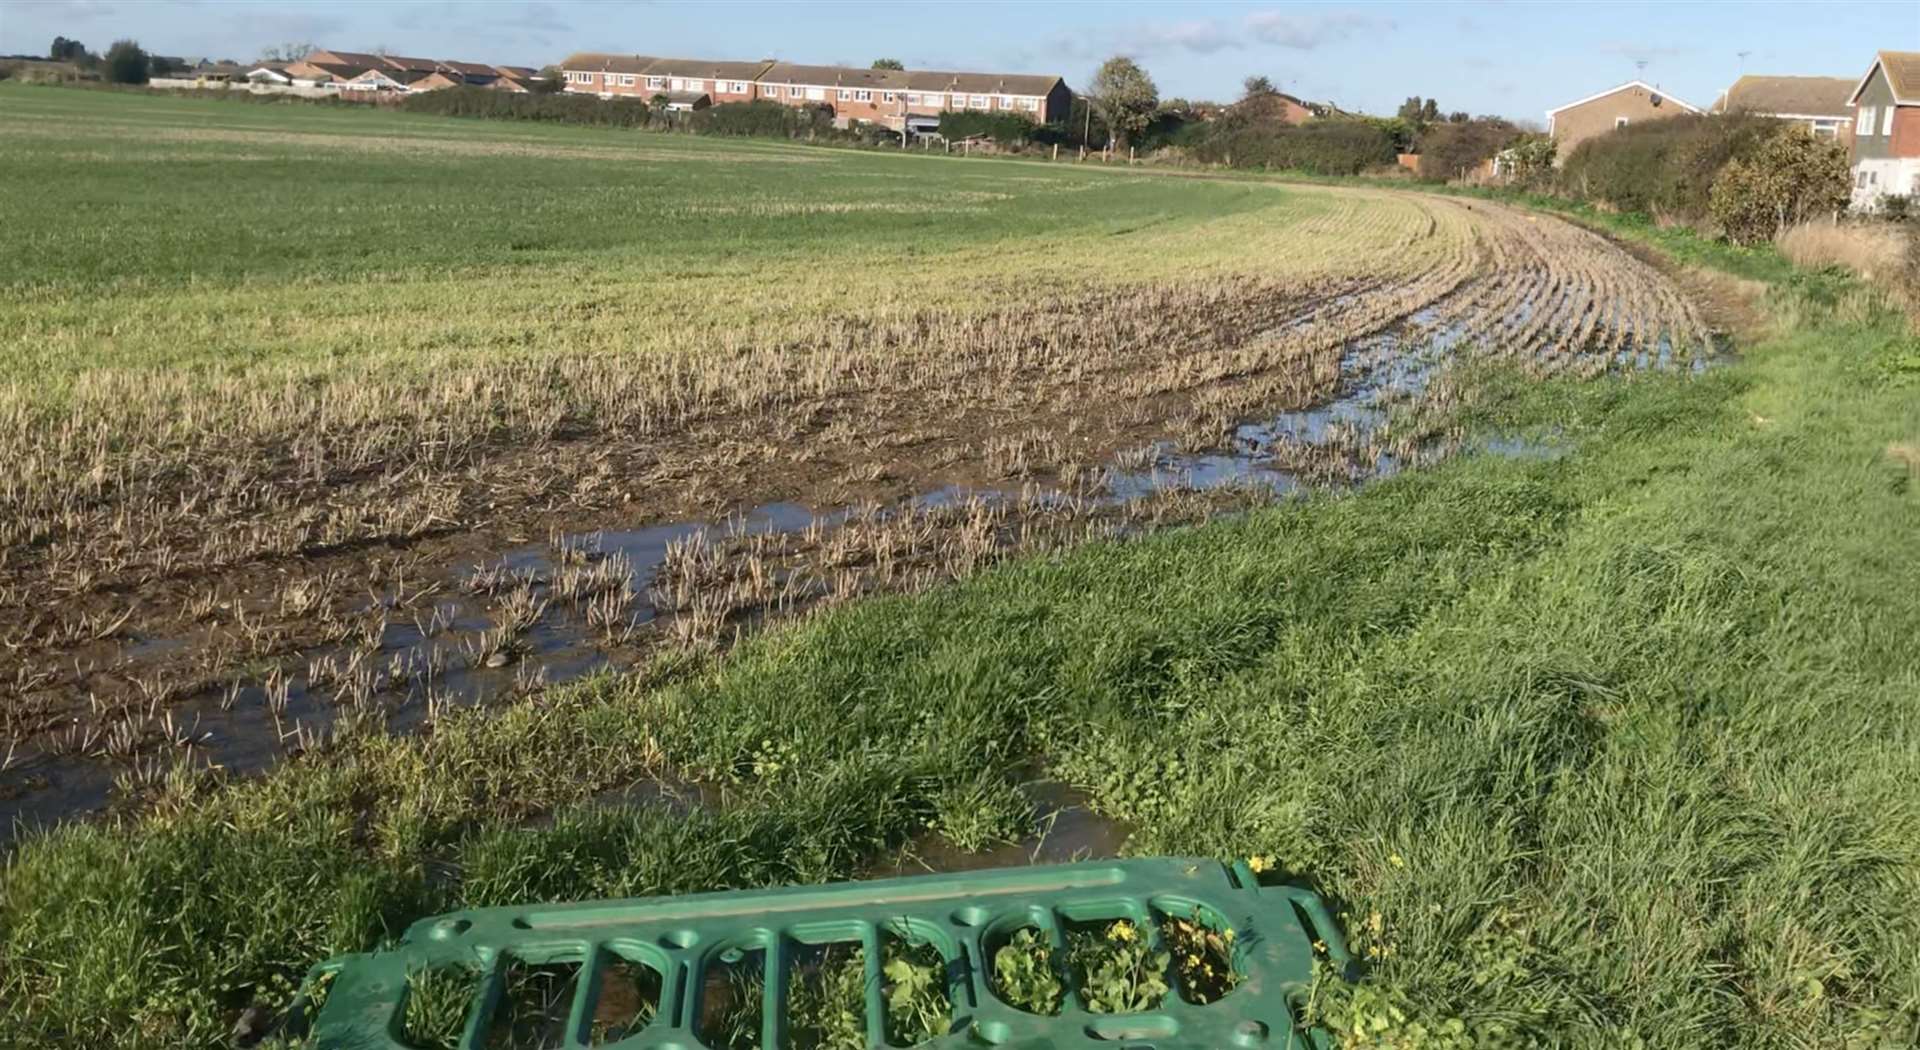 The field is said to be constantly saturated as a result of the leak